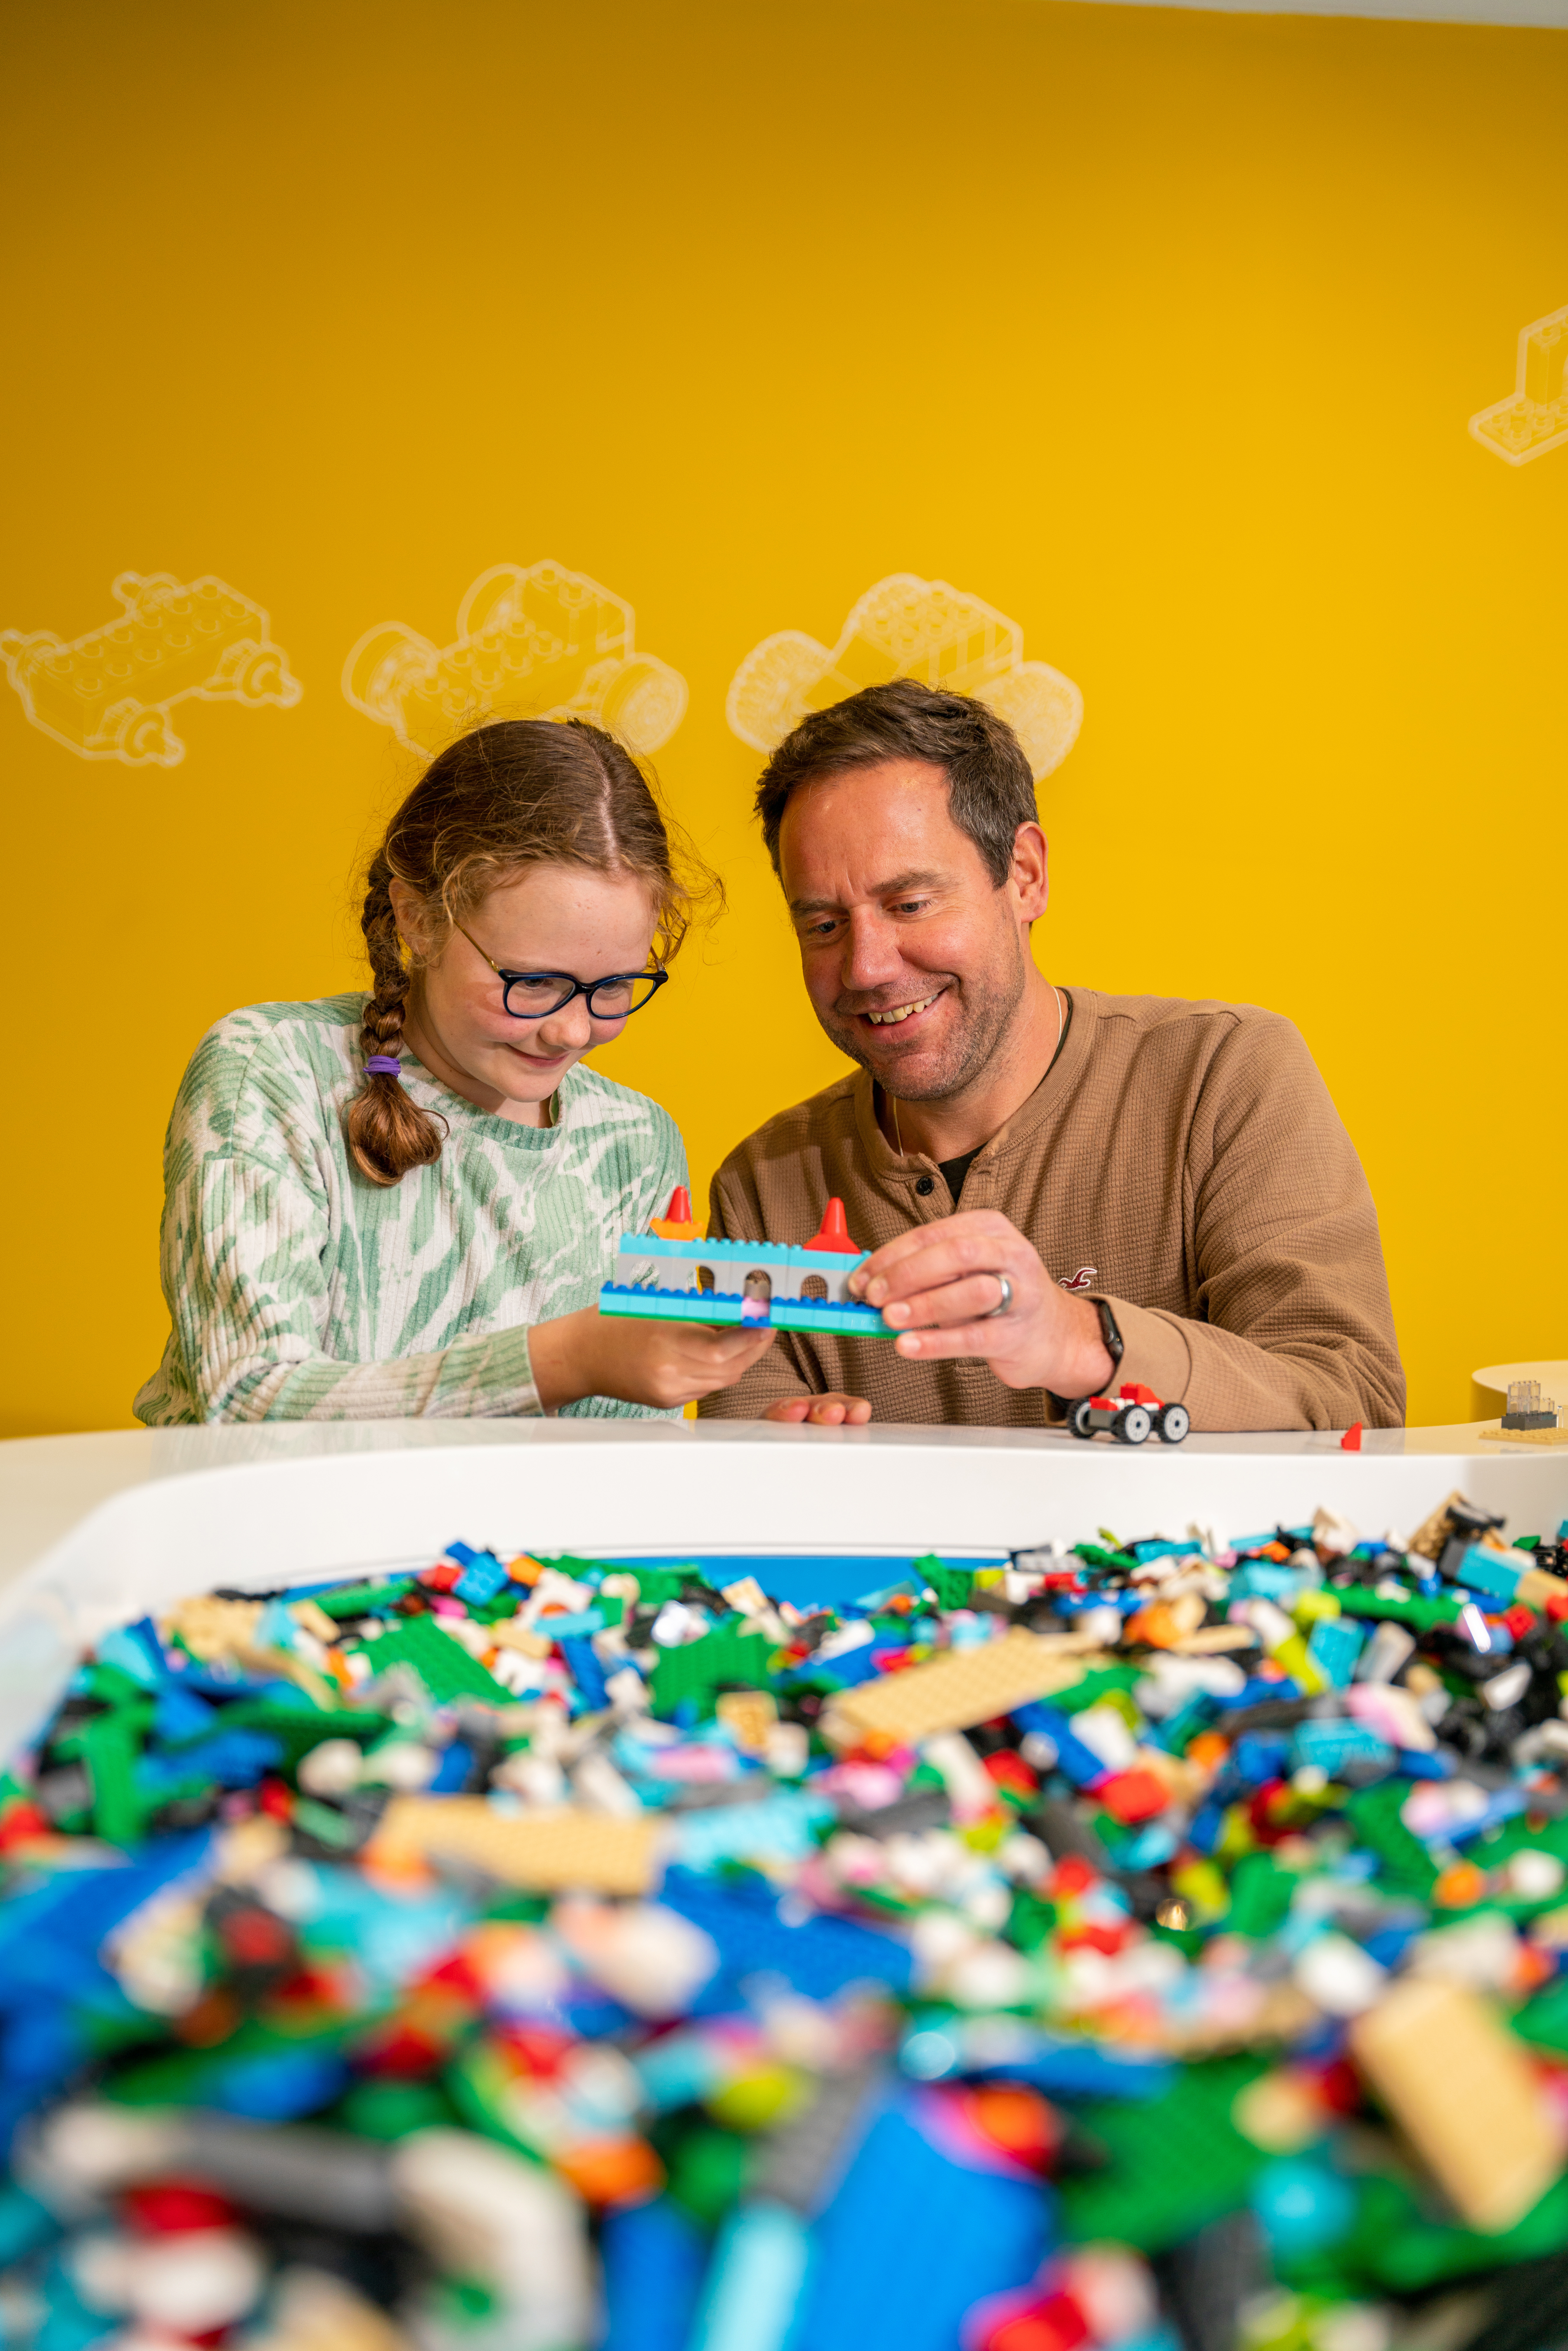 Family in The Brick at the LEGOLAND Windsor Resort